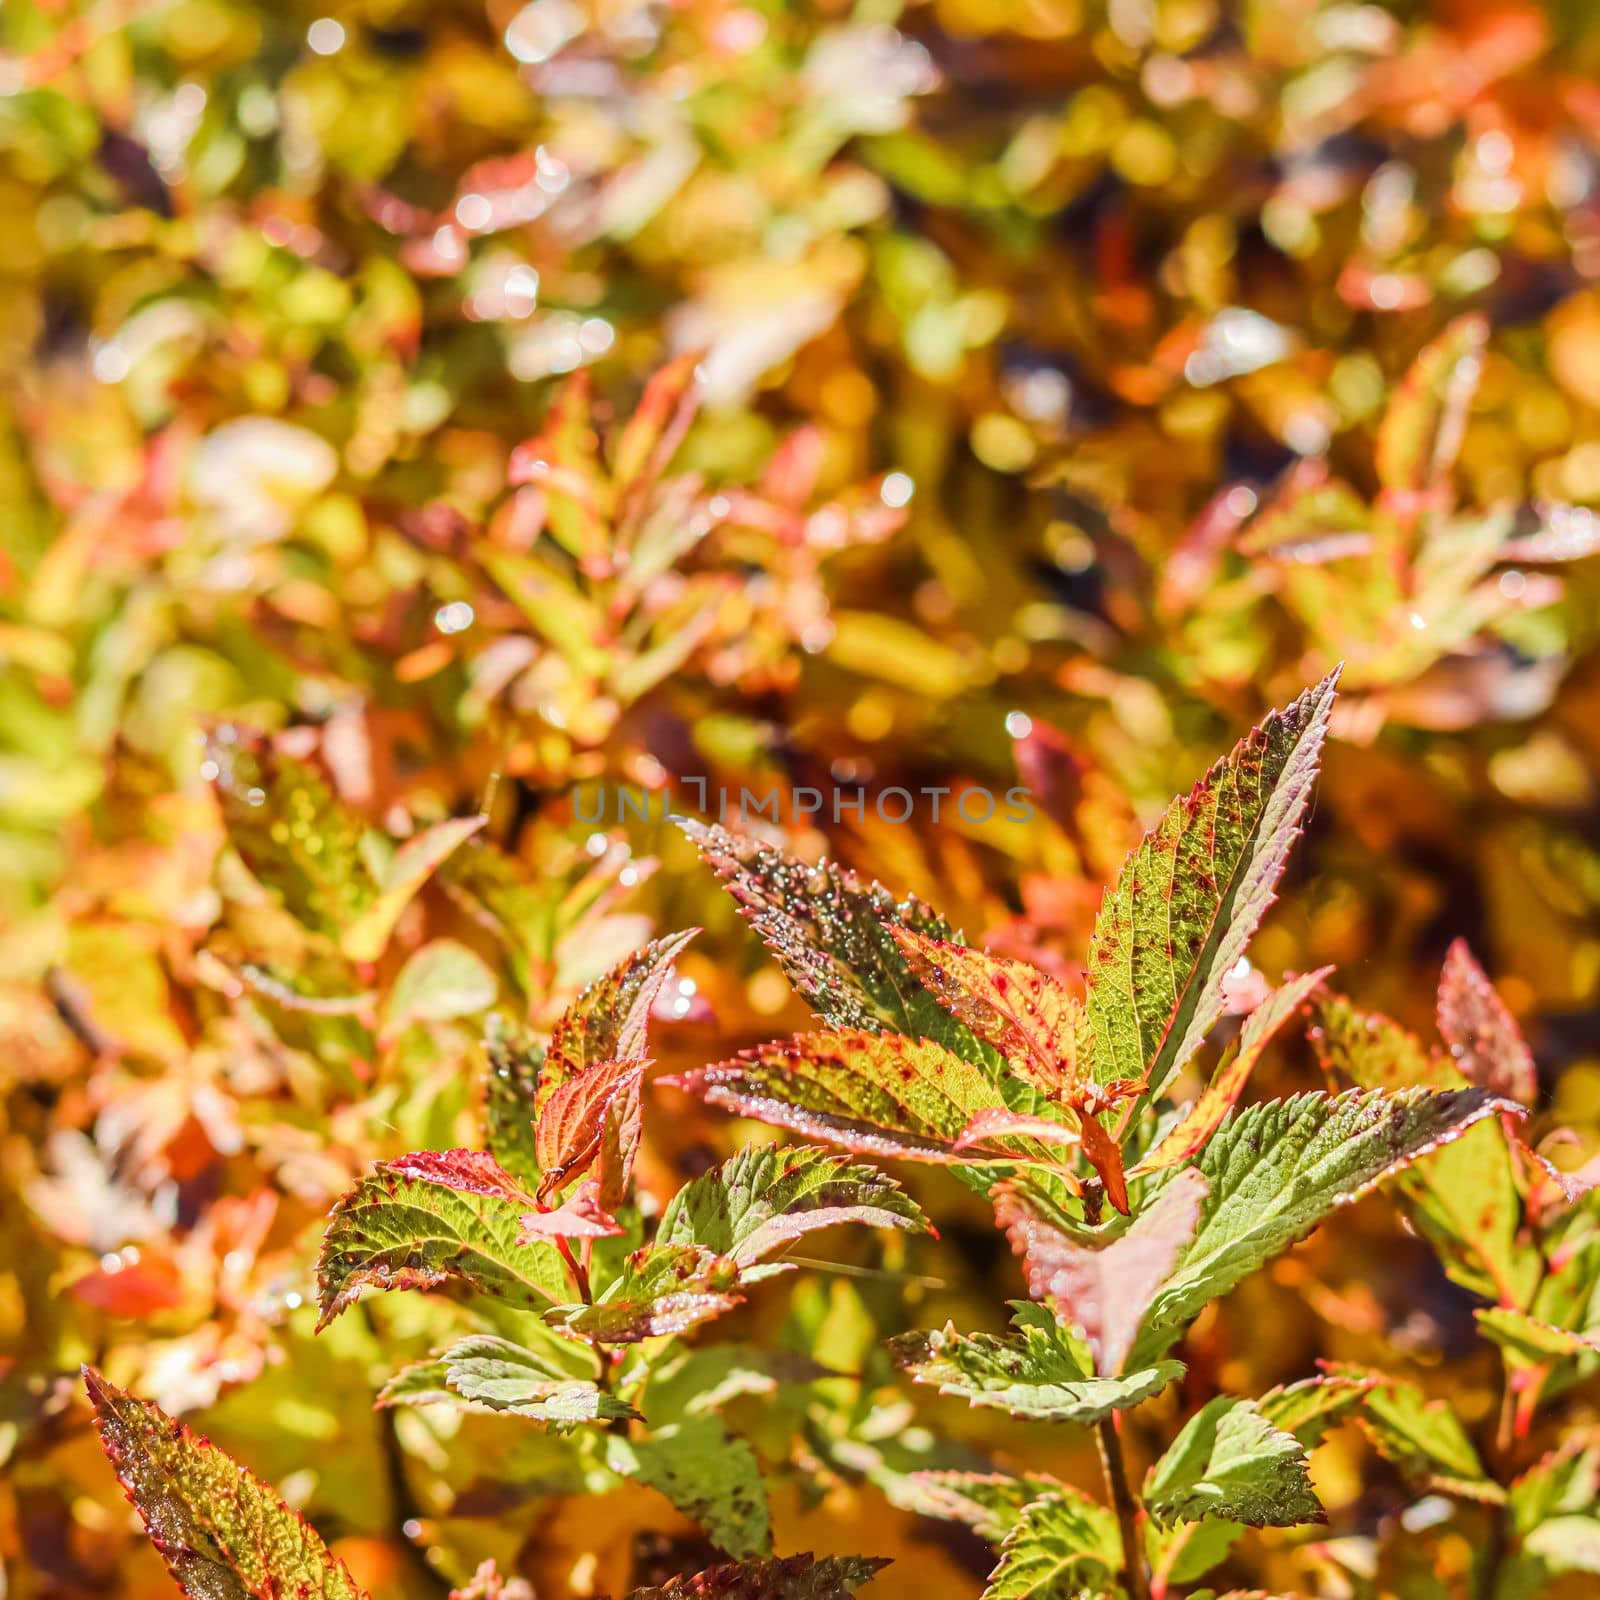 Yellow and red Spiraea japonica leaves in the autumn garden. Blurred natural background